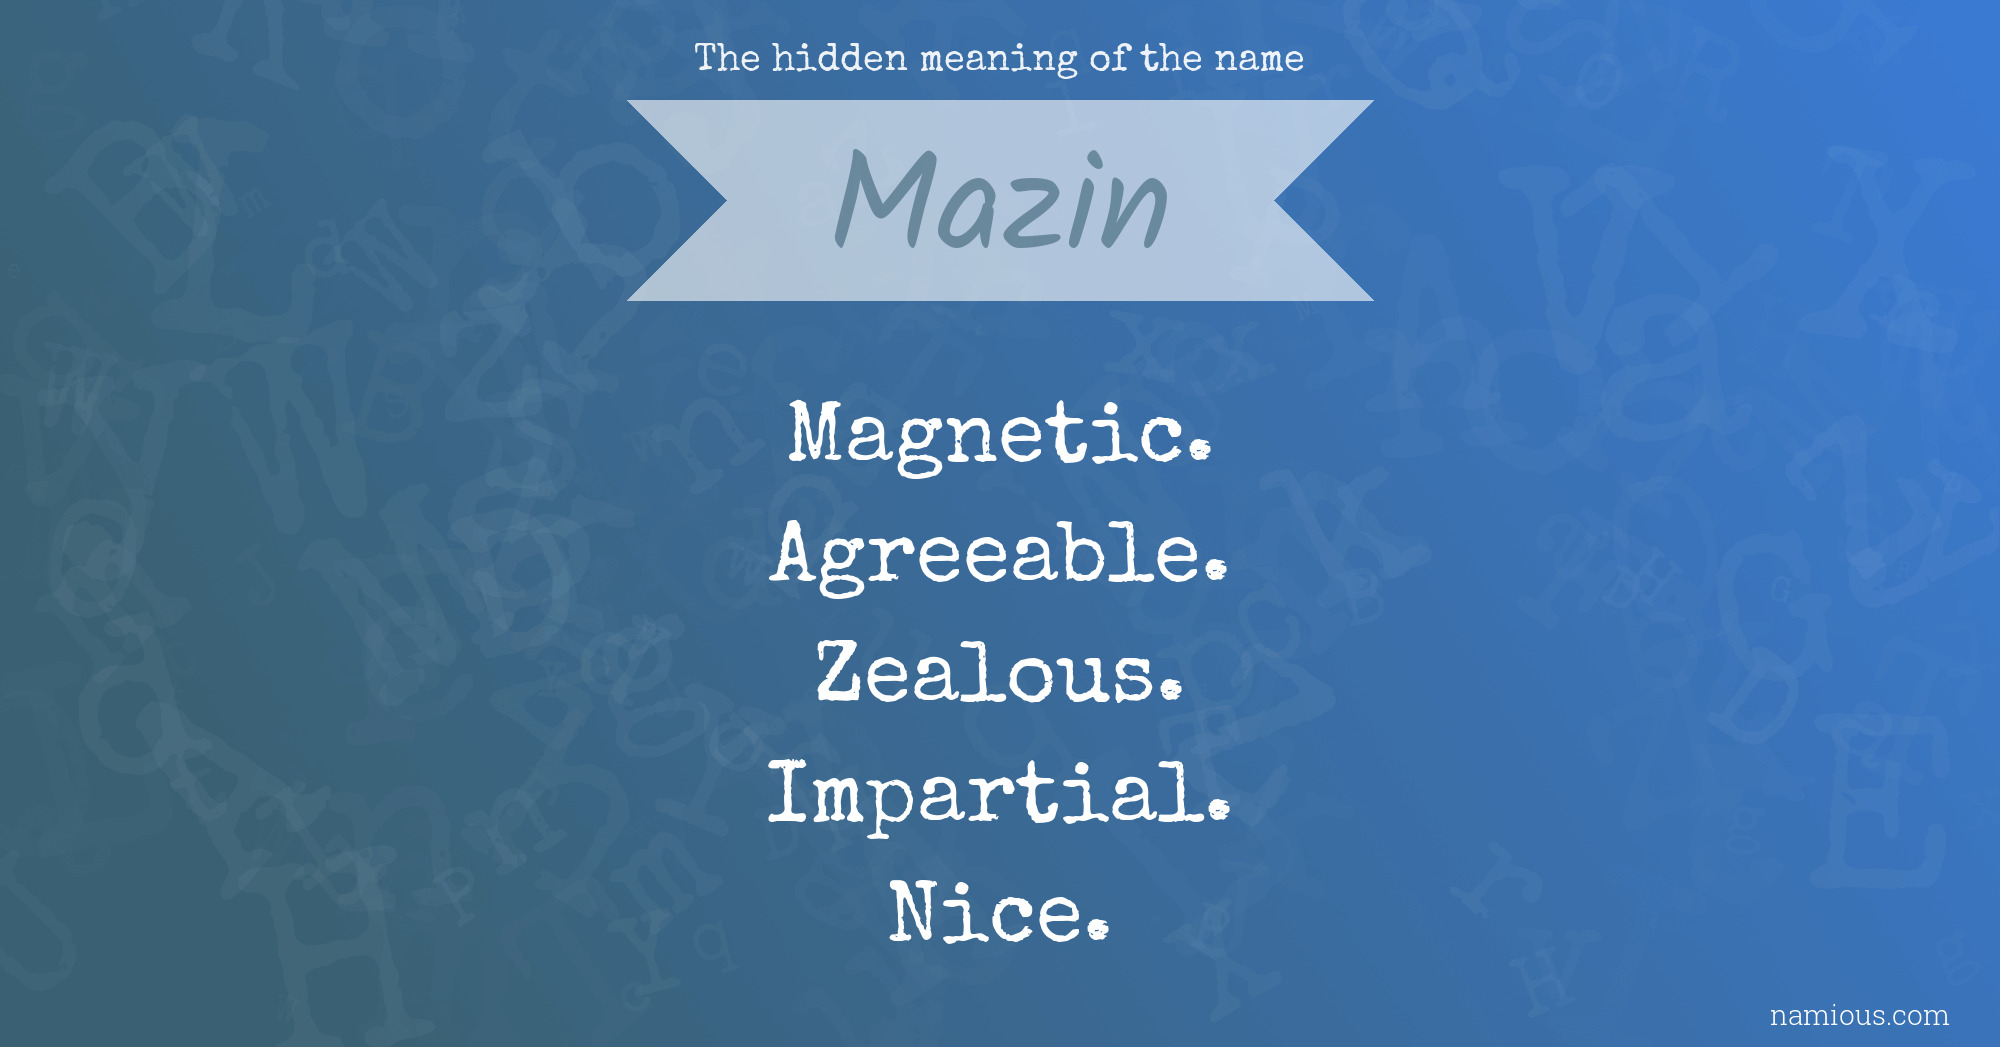 The hidden meaning of the name Mazin